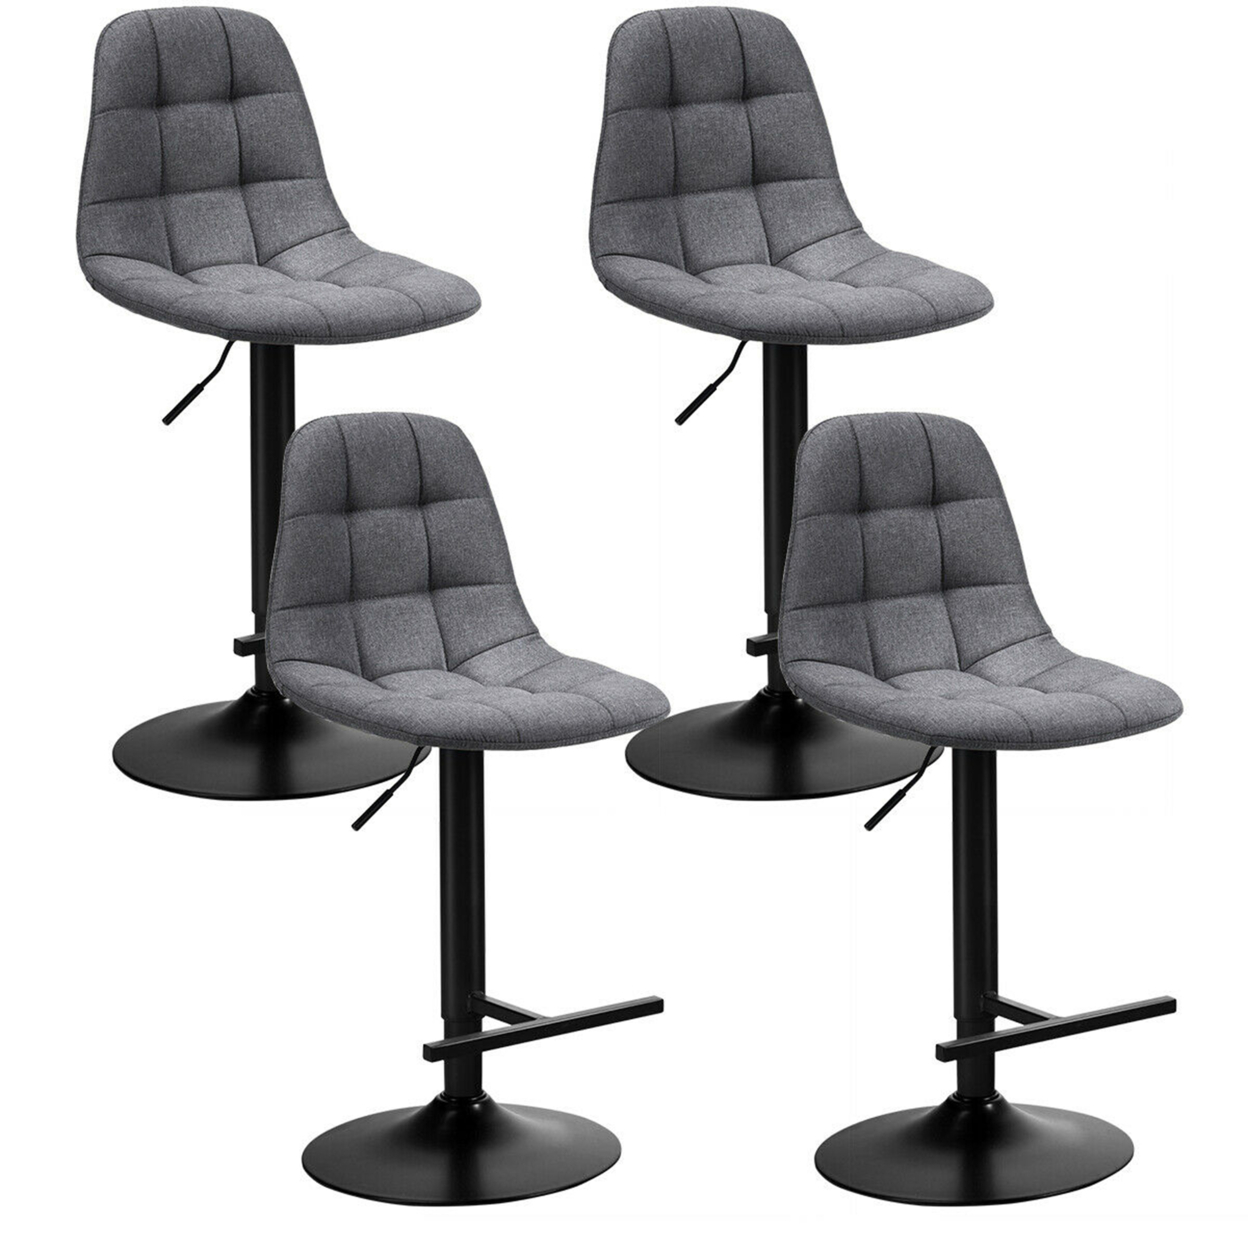 Set Of 4 Adjustable Bar Stools Swivel Counter Height Linen Chairs With Back Gray